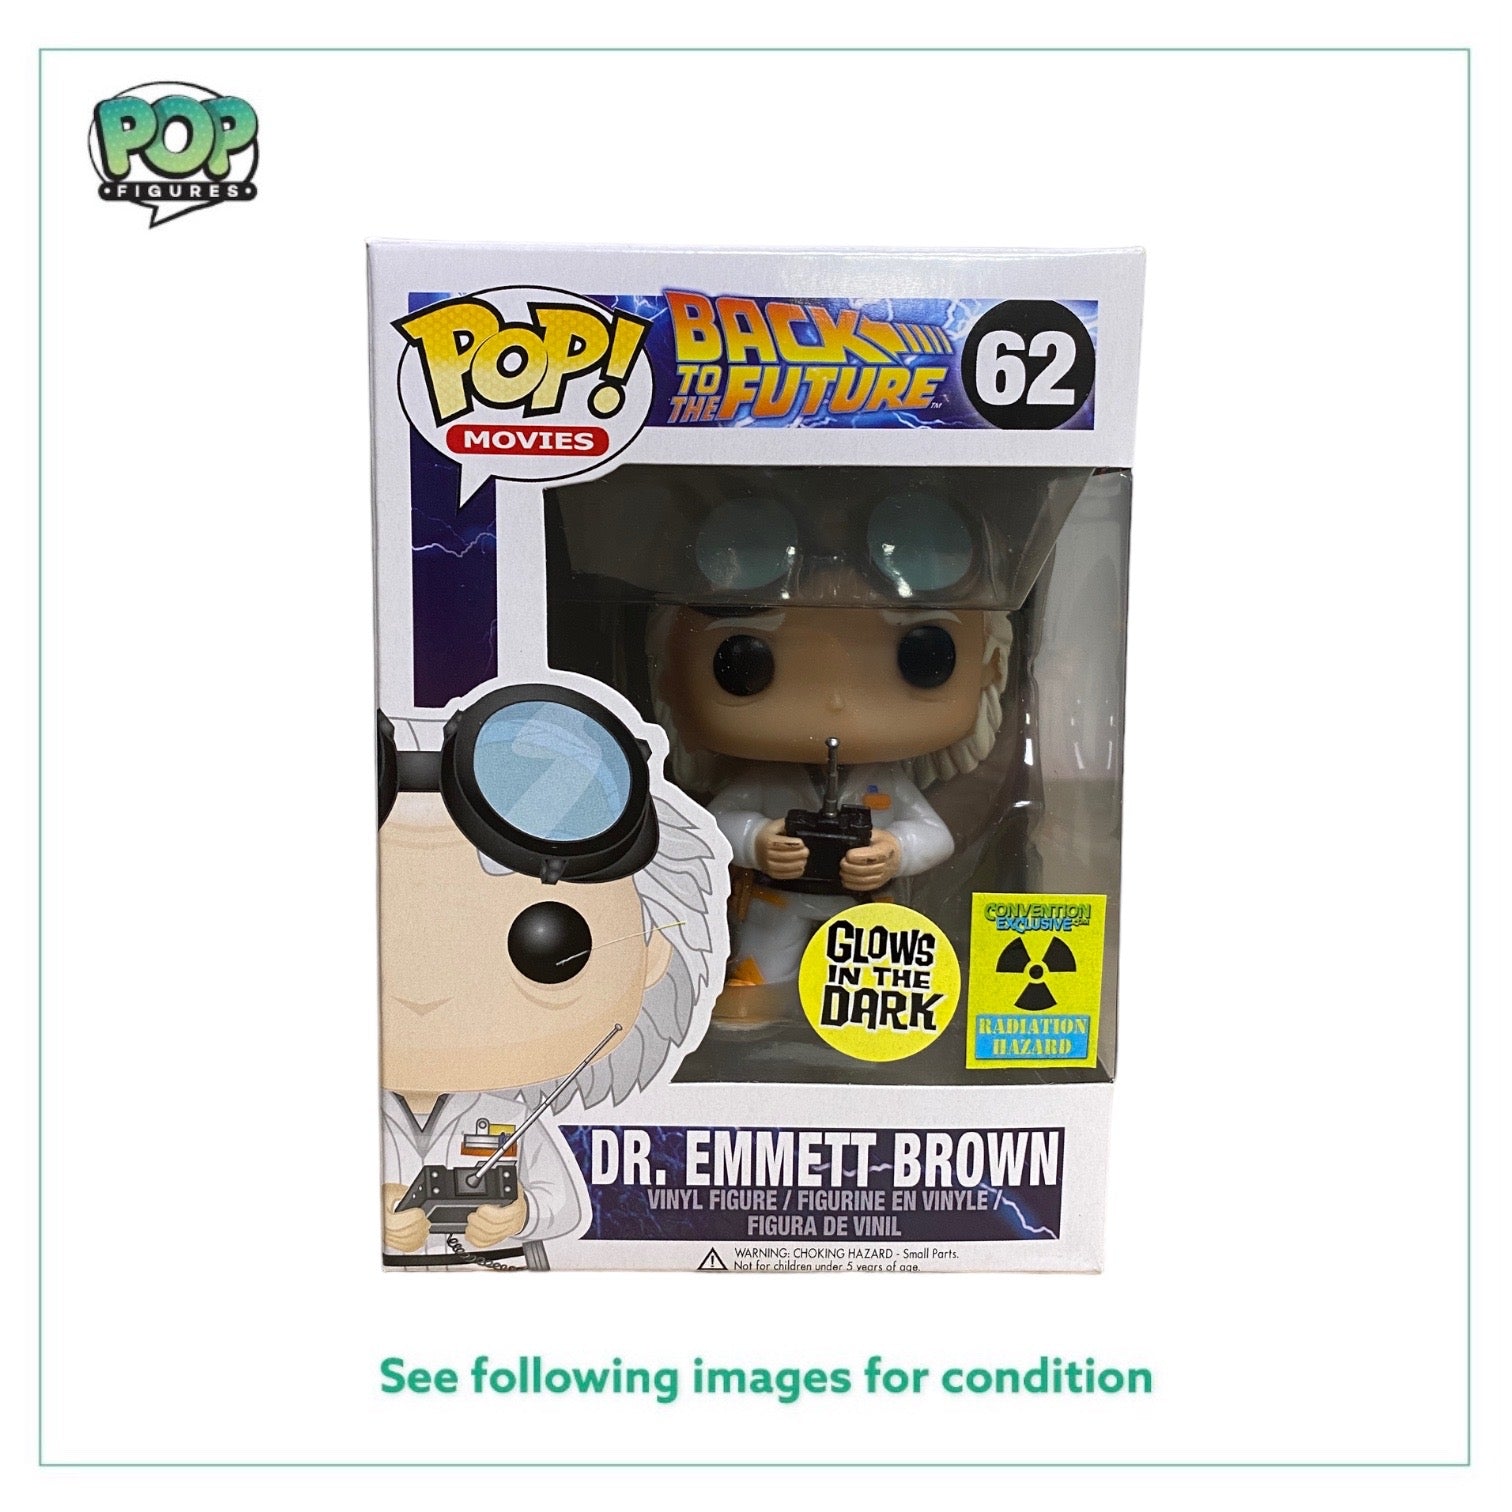 Dr. Emmett Brown #62 (Glows In The Dark) Funko Pop! - Back to the Future - 2014 Convention Exclusive - Condition 8.5/10